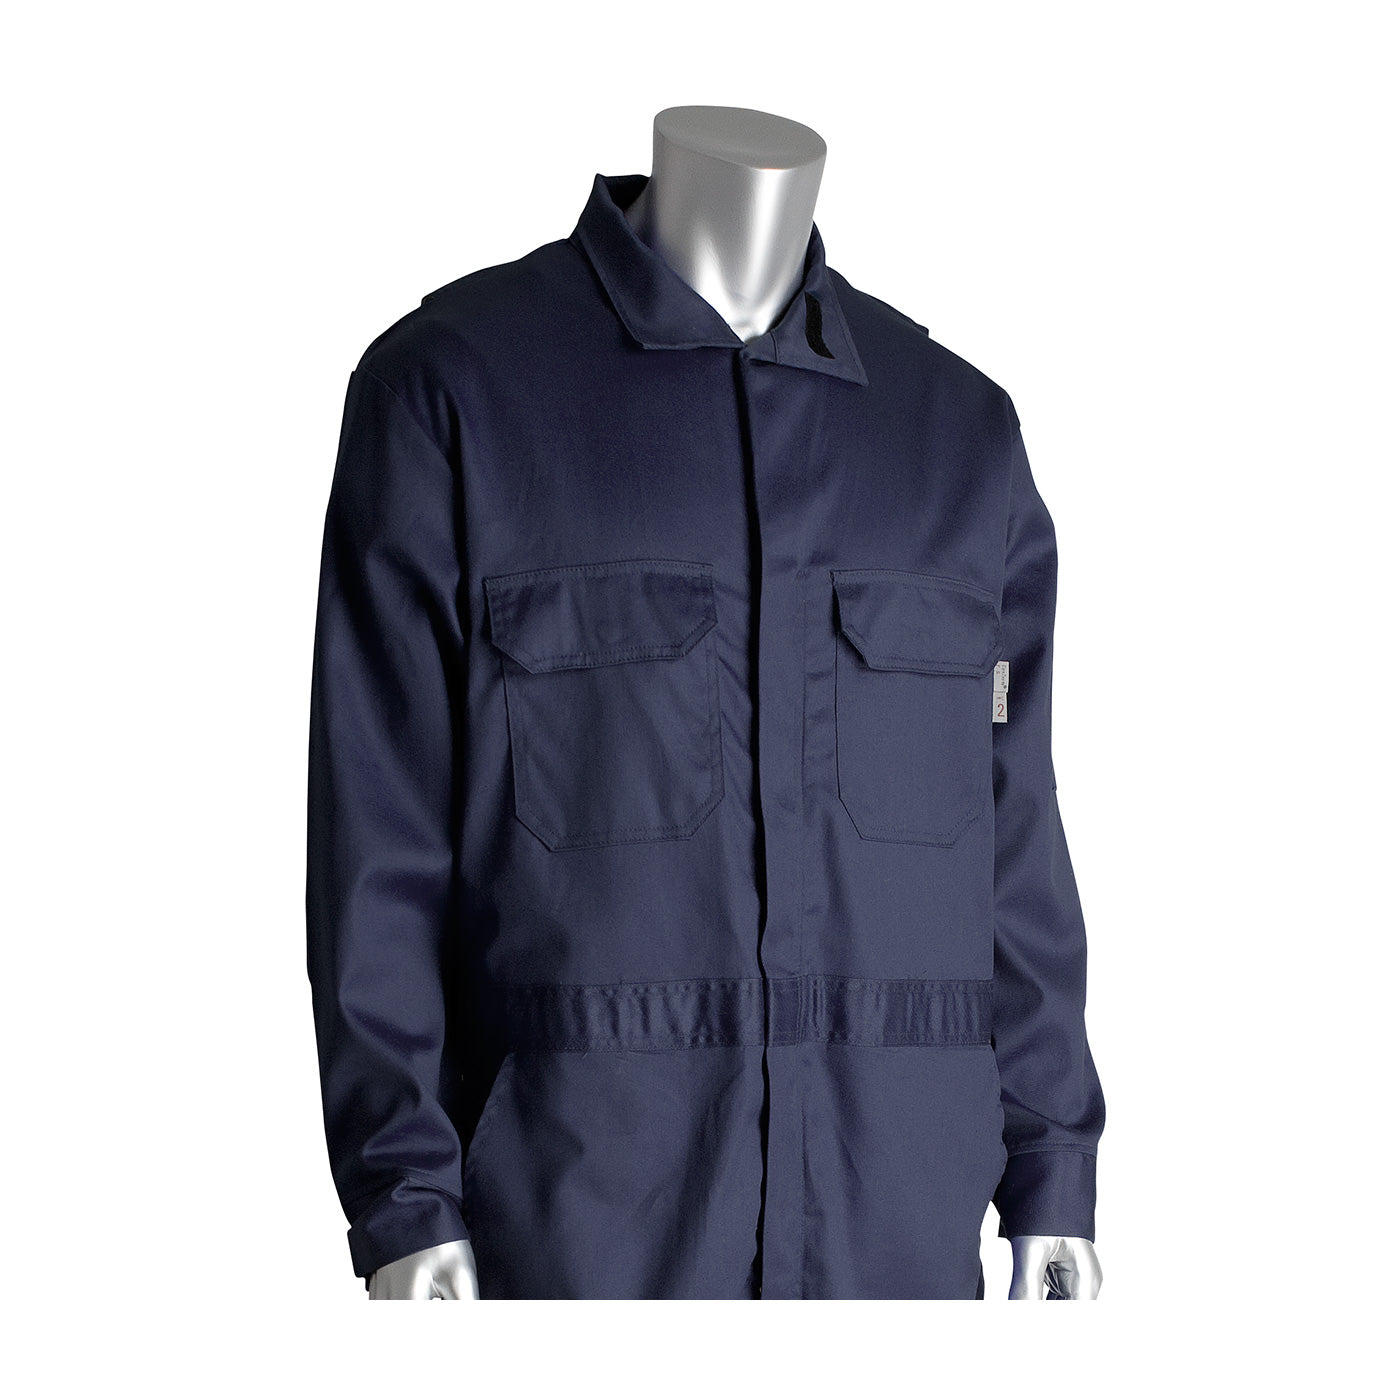 PIP 385-FRSC-KH/S AR/FR Dual Certified Coverall with Zipper Closure - 9.2 Cal/cm2